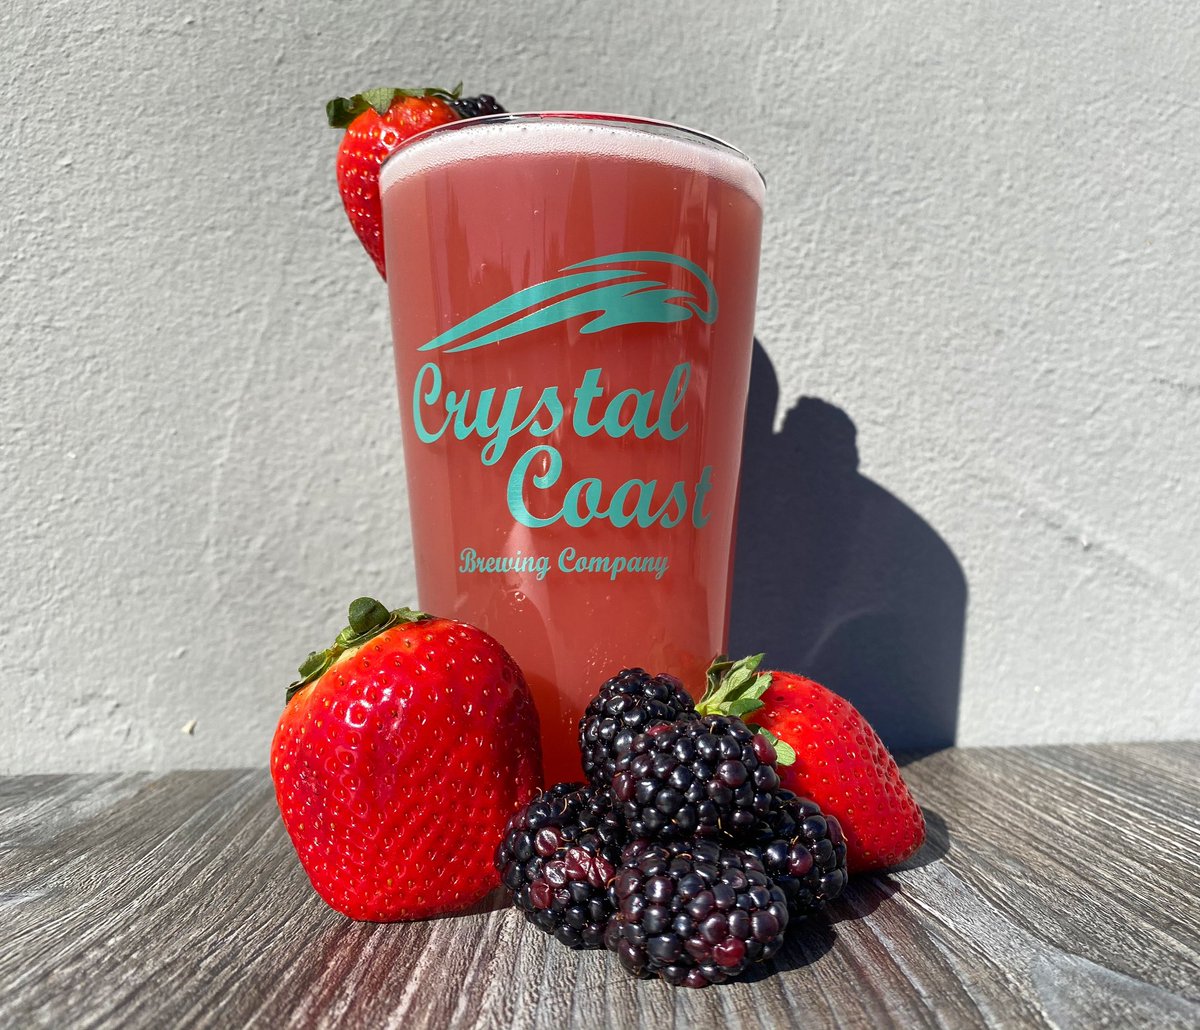 🍓 Salty Wind Gose w/ Mixed Berry 🍓 One of our favorite beers here at Crystal Coast Brewing is back! Using 100% real strawberries and blackberries, with a final addition of black raspberries, the aroma and fruity flavors of this fruited Gose are sure to please your senses!